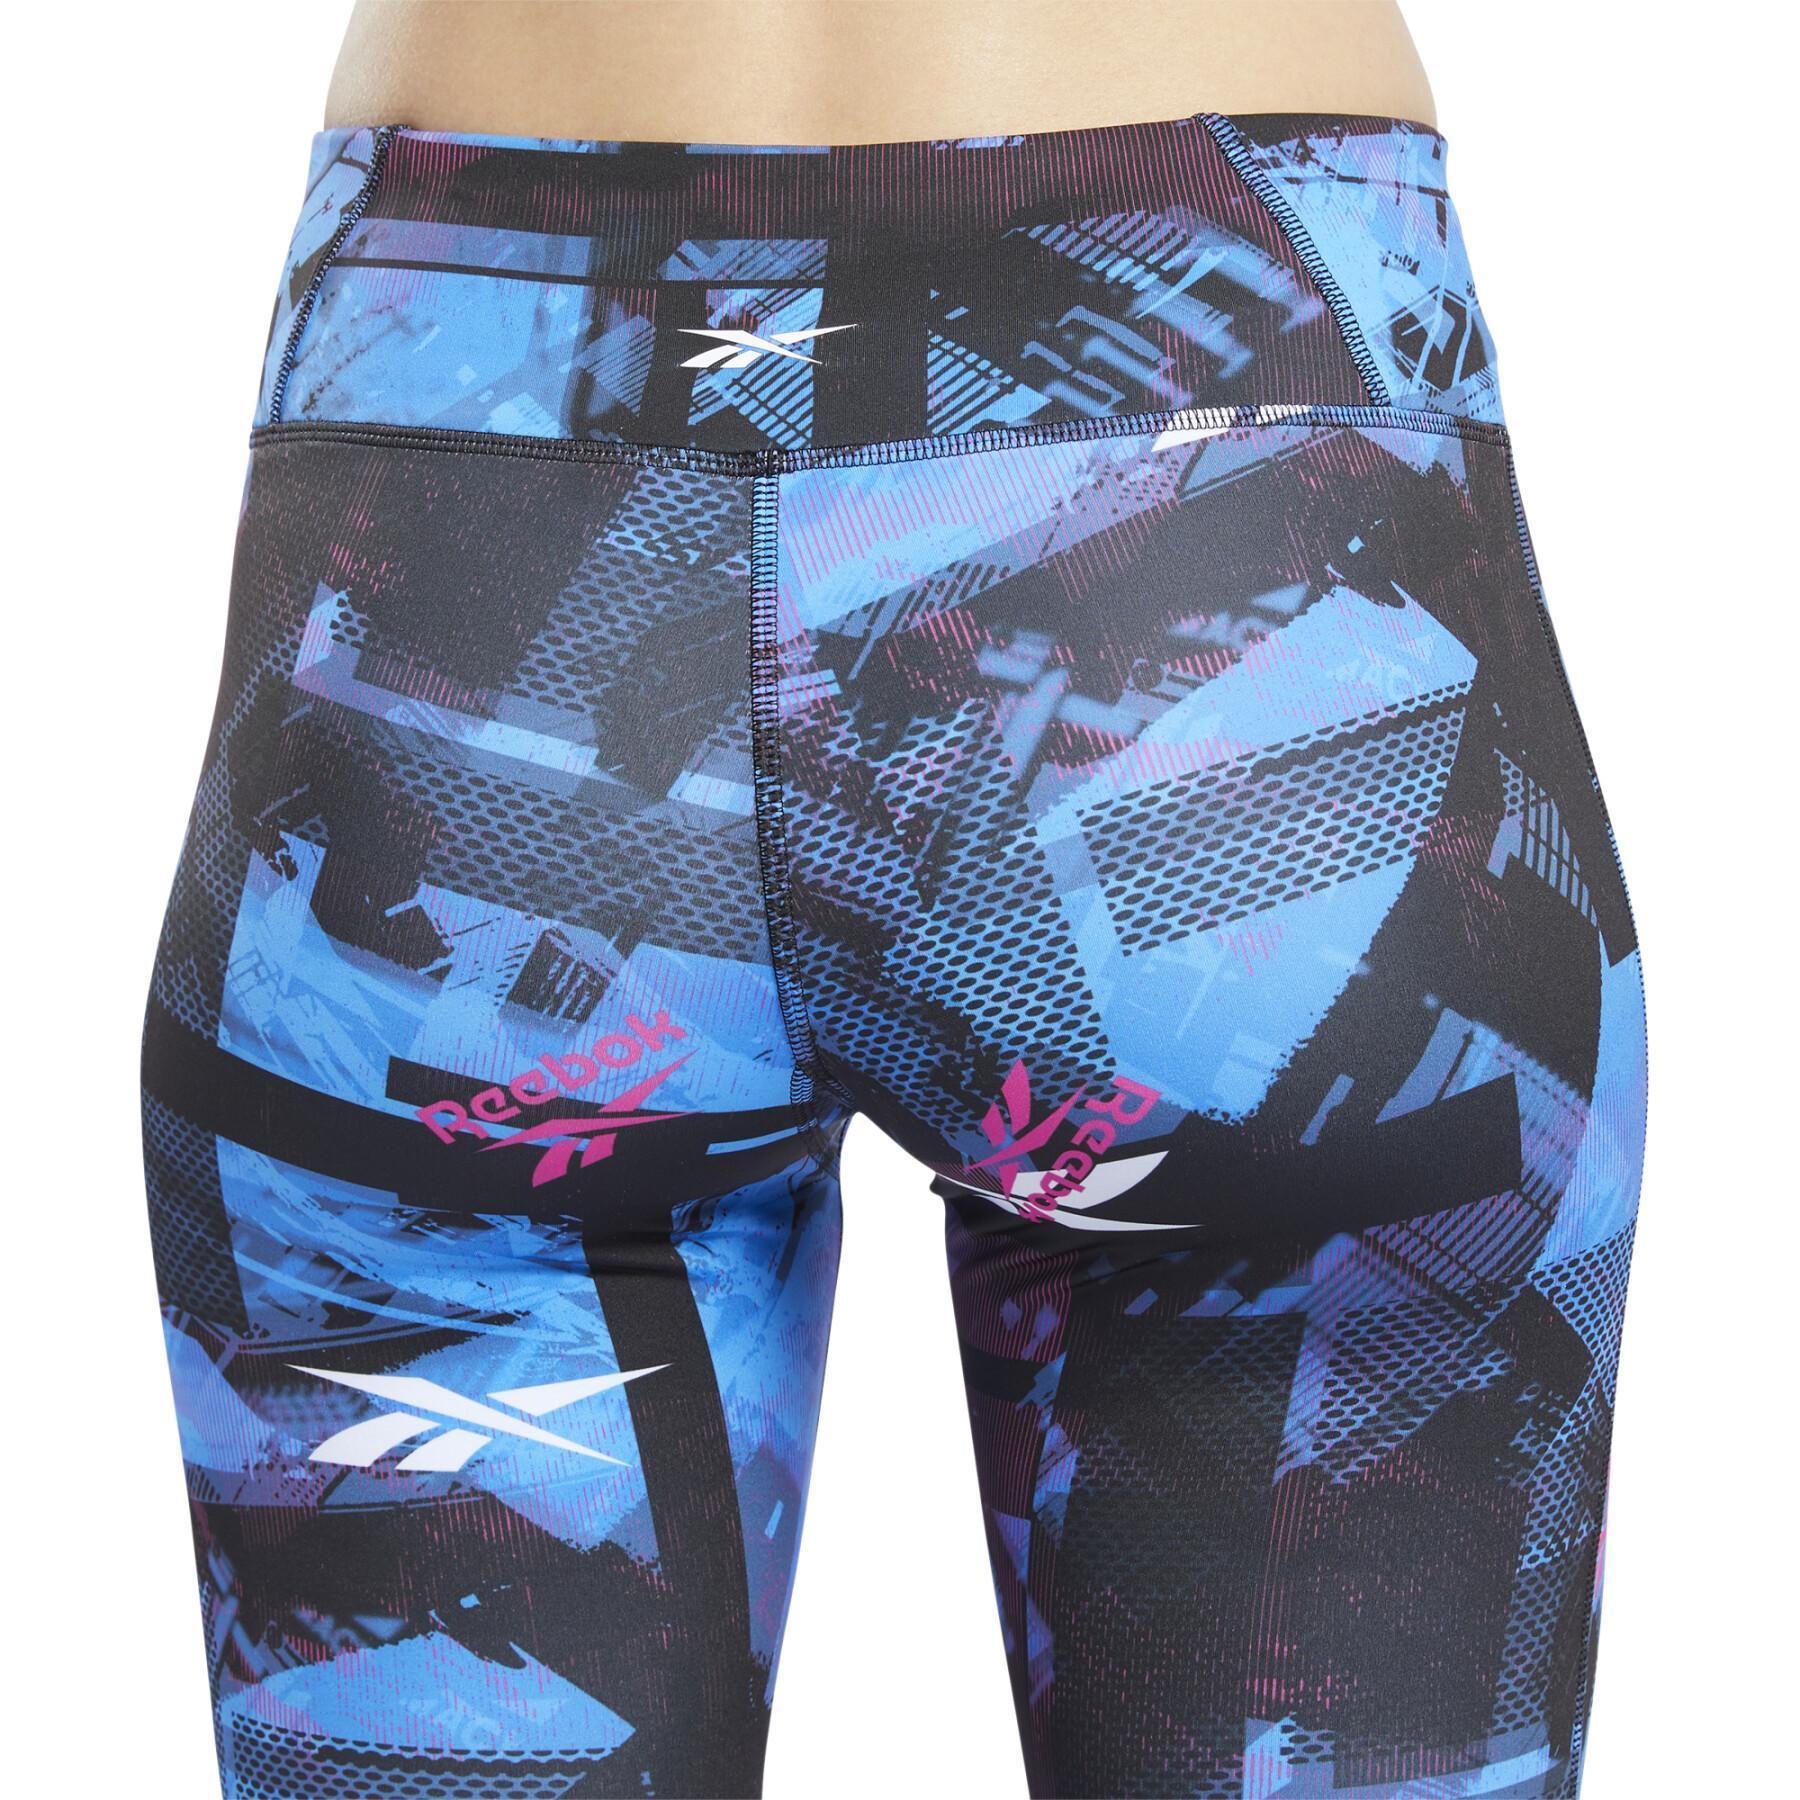 Women's tights Reebok Workout Ready MYT Printed